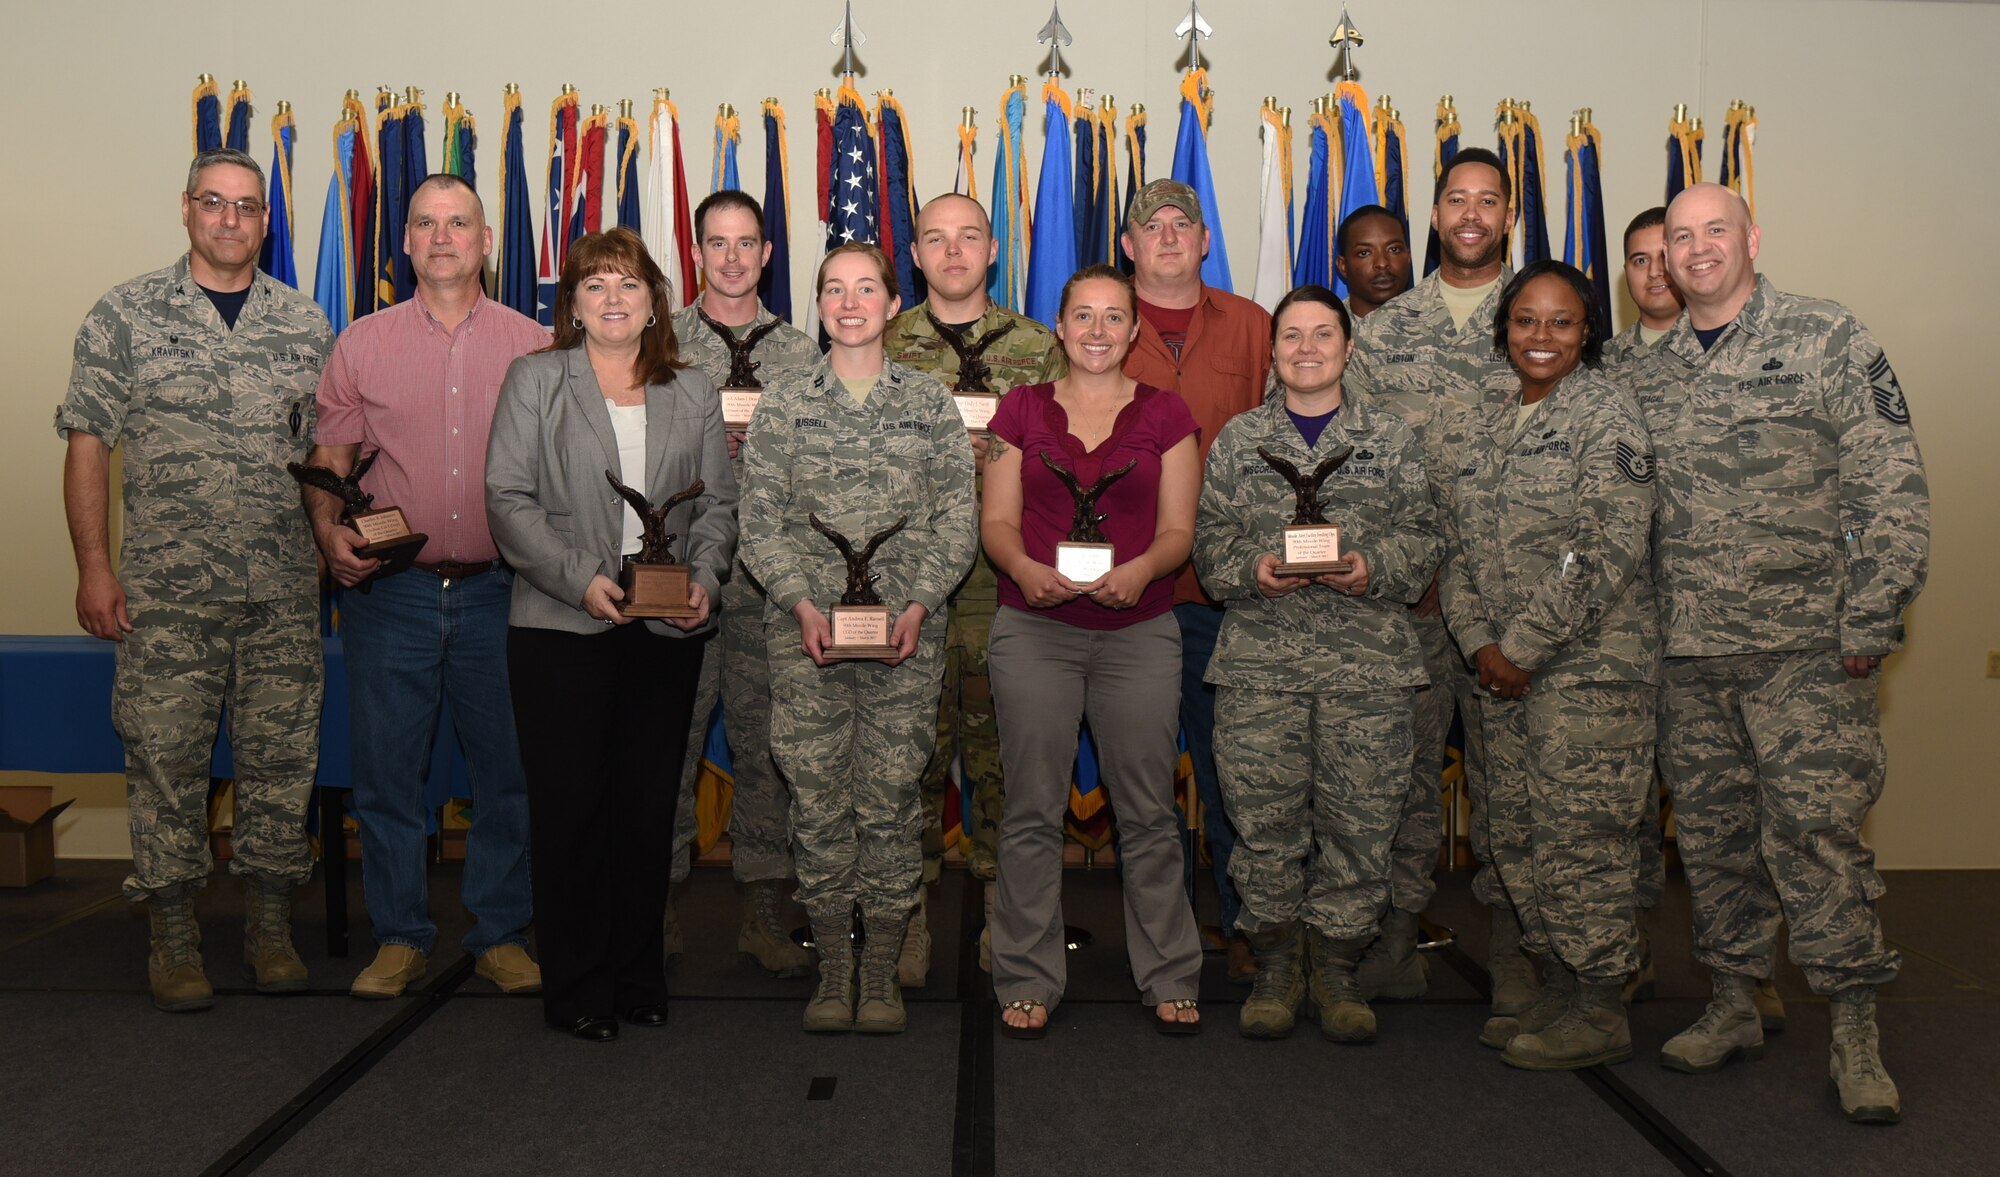 Col. Stephen Kravitsky, 90th Missile Wing commander, and Chief Master Sgt. Jeffery Steagall, 90th Missile Wing command chief, pose with the wing’s first quarter award winners at F.E. Warren Air Force Base, Wyo., May 5, 2017. The wing held a celebration for all the nominees and presented the awards to the winners during a ceremony. (U.S. Air Force photo by Airman 1st Class Breanna Carter)